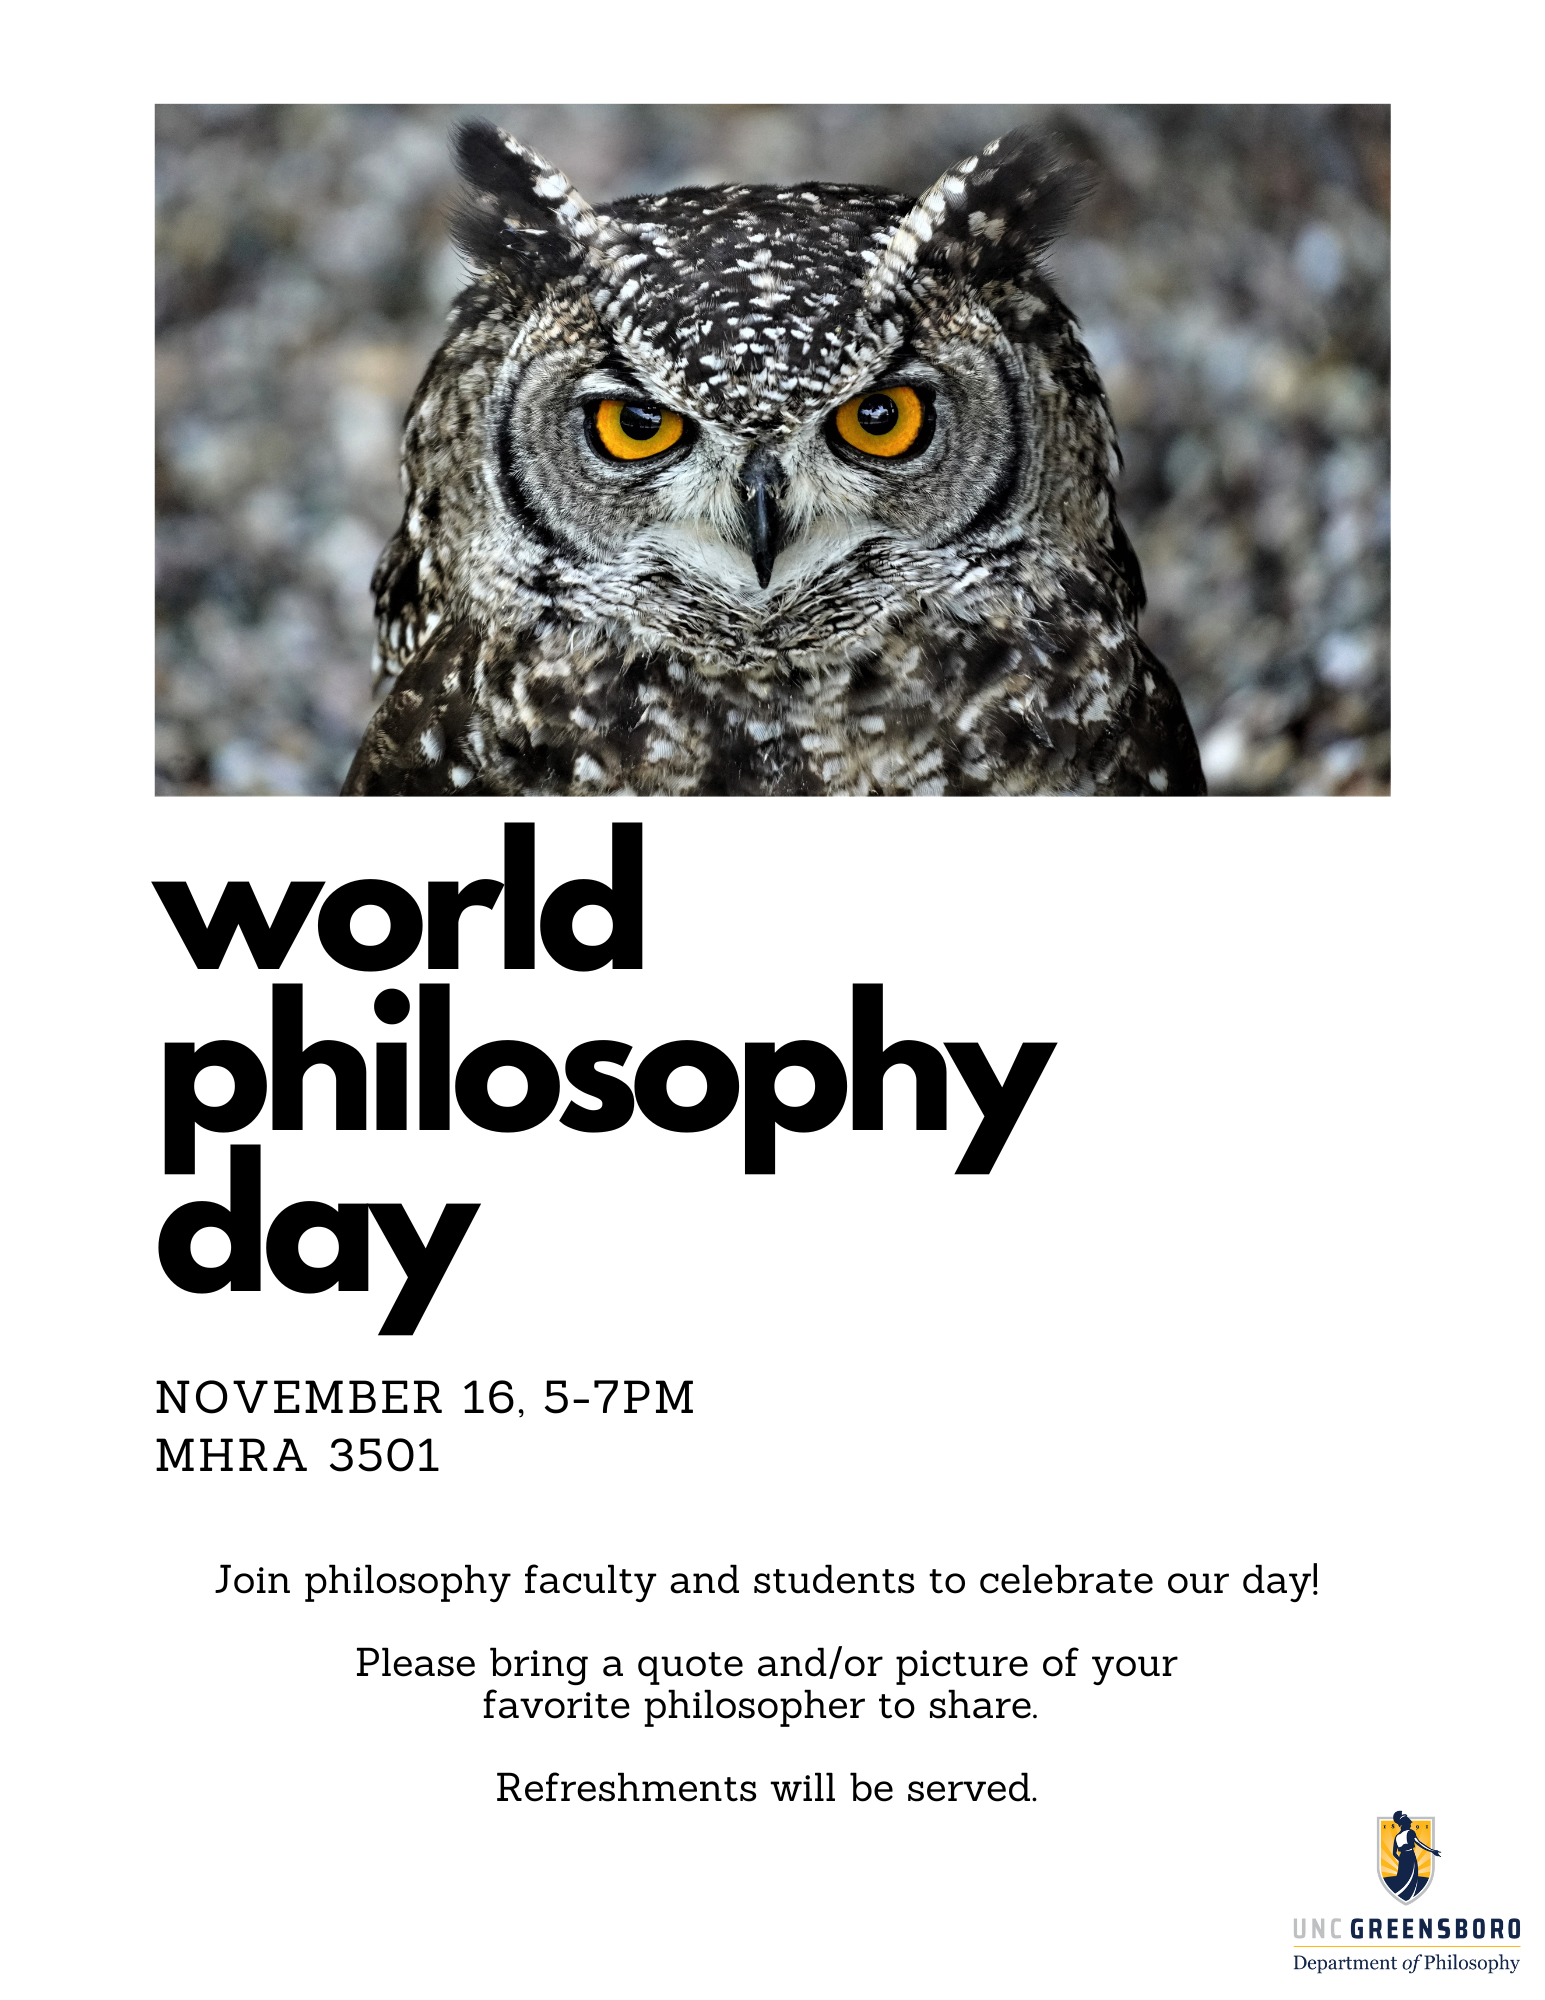 The poster for World Philosophy Day 2023 with a photo of an owl at top.